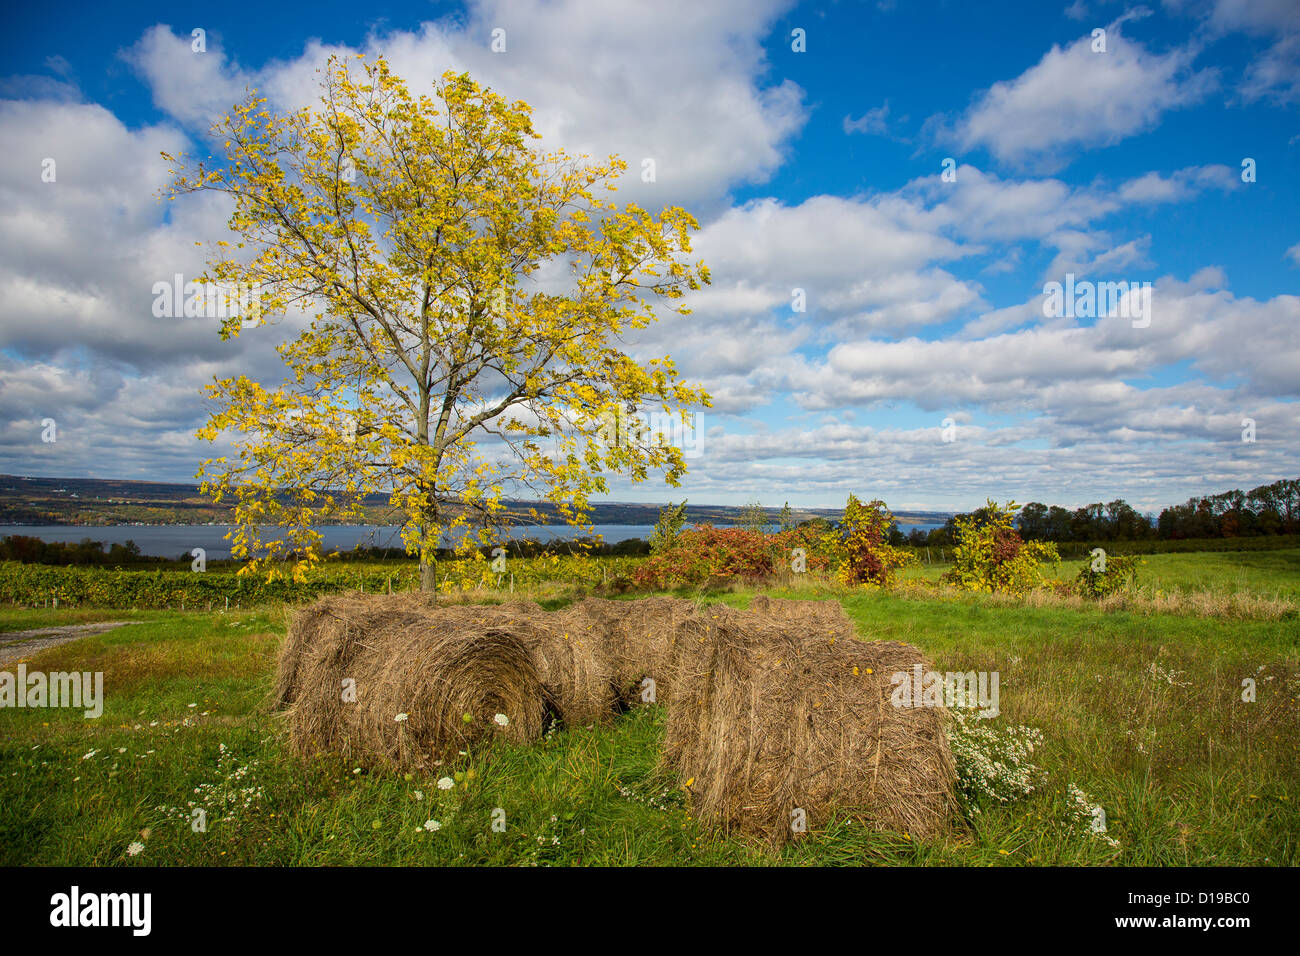 Fall color in the Finger Lakes region of New York state Stock Photo